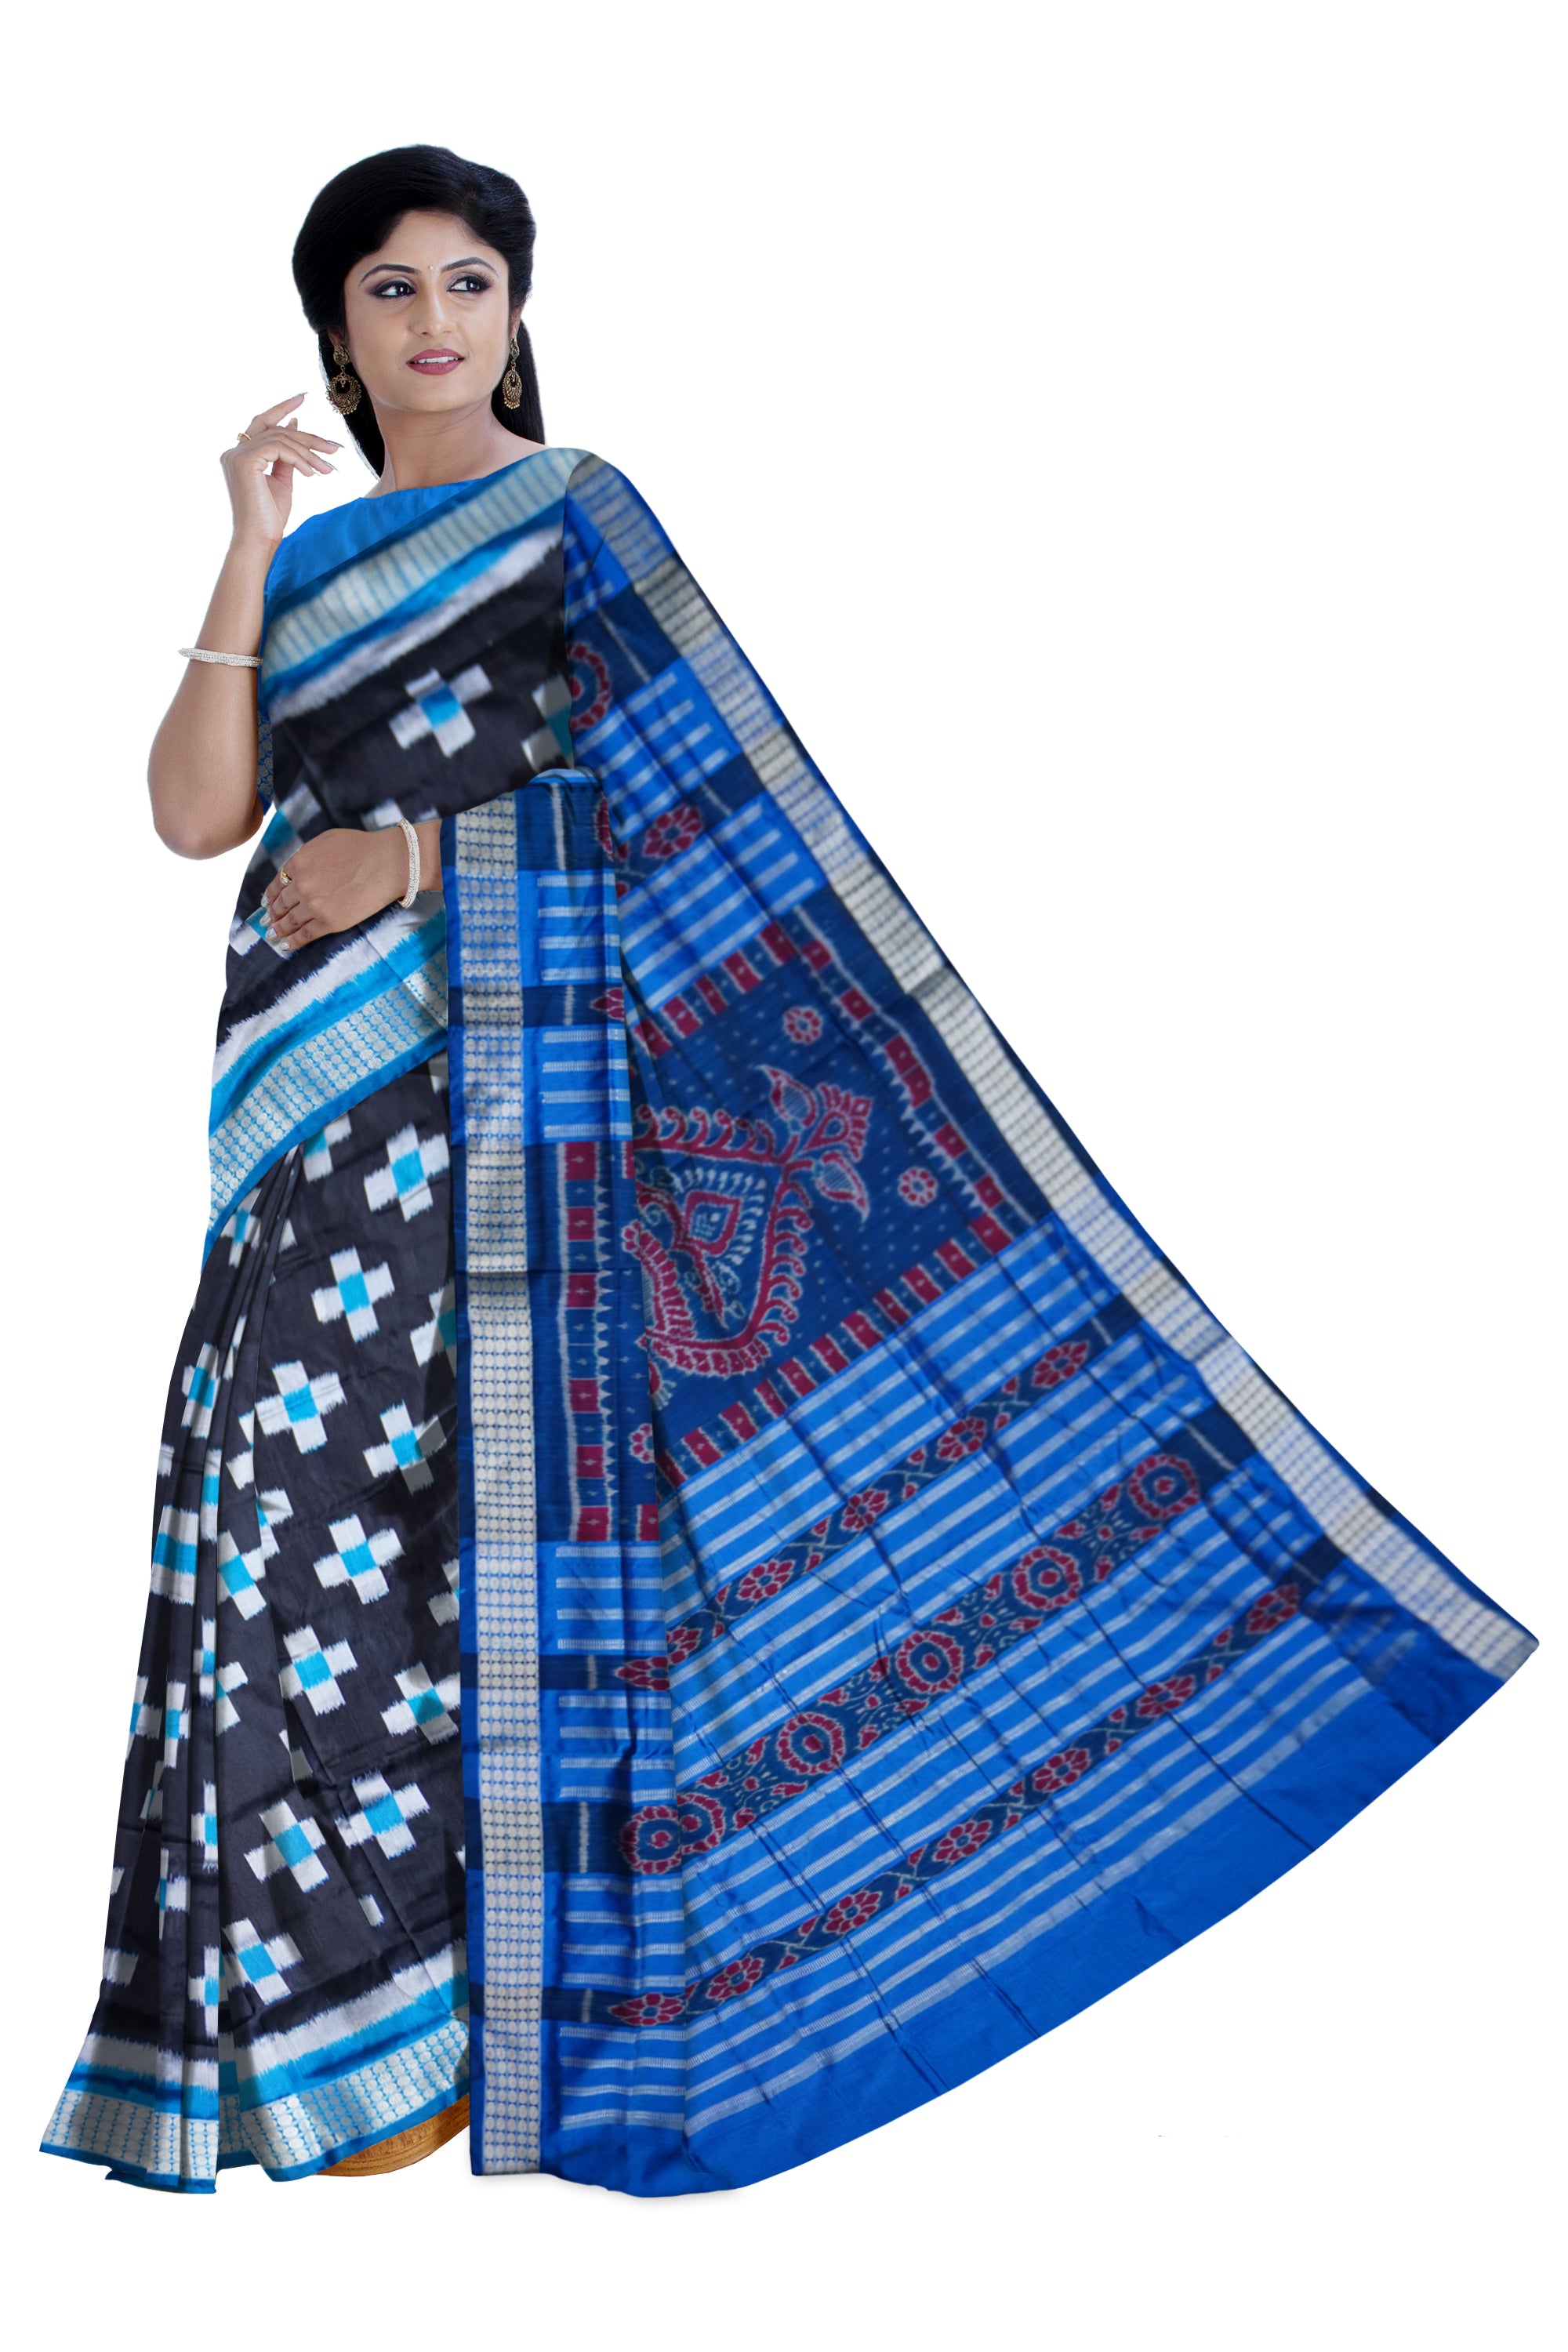 FULL BODY HAVE BLACK AND PALLU IS SKY COLOR BASE PASAPALI PATTERN PATA SAREE.COMES WITH MATCHING BLOUSE PIECE. - Koshali Arts & Crafts Enterprise